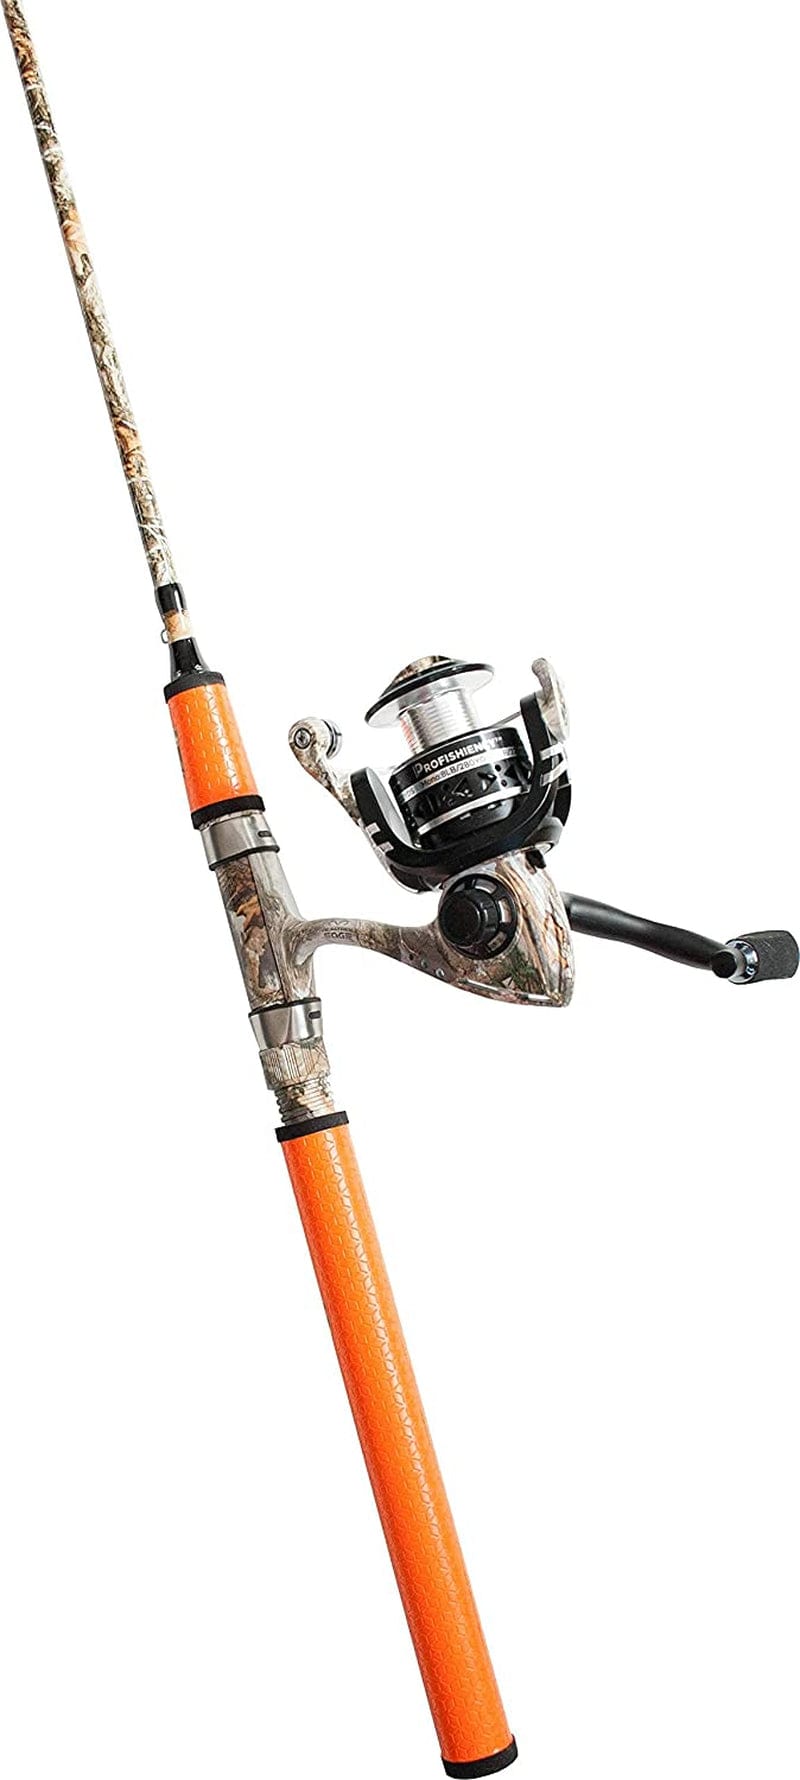 Profishiency 6FT - 7FT Lightweight 2-Piece Spinning Rod and Reel Combos - Variety of Lengths, Actions, & Features - Fiberglass, IM6 & IM7 Graphite Fishing Rods Sporting Goods > Outdoor Recreation > Fishing > Fishing Rods ProFISHiency   